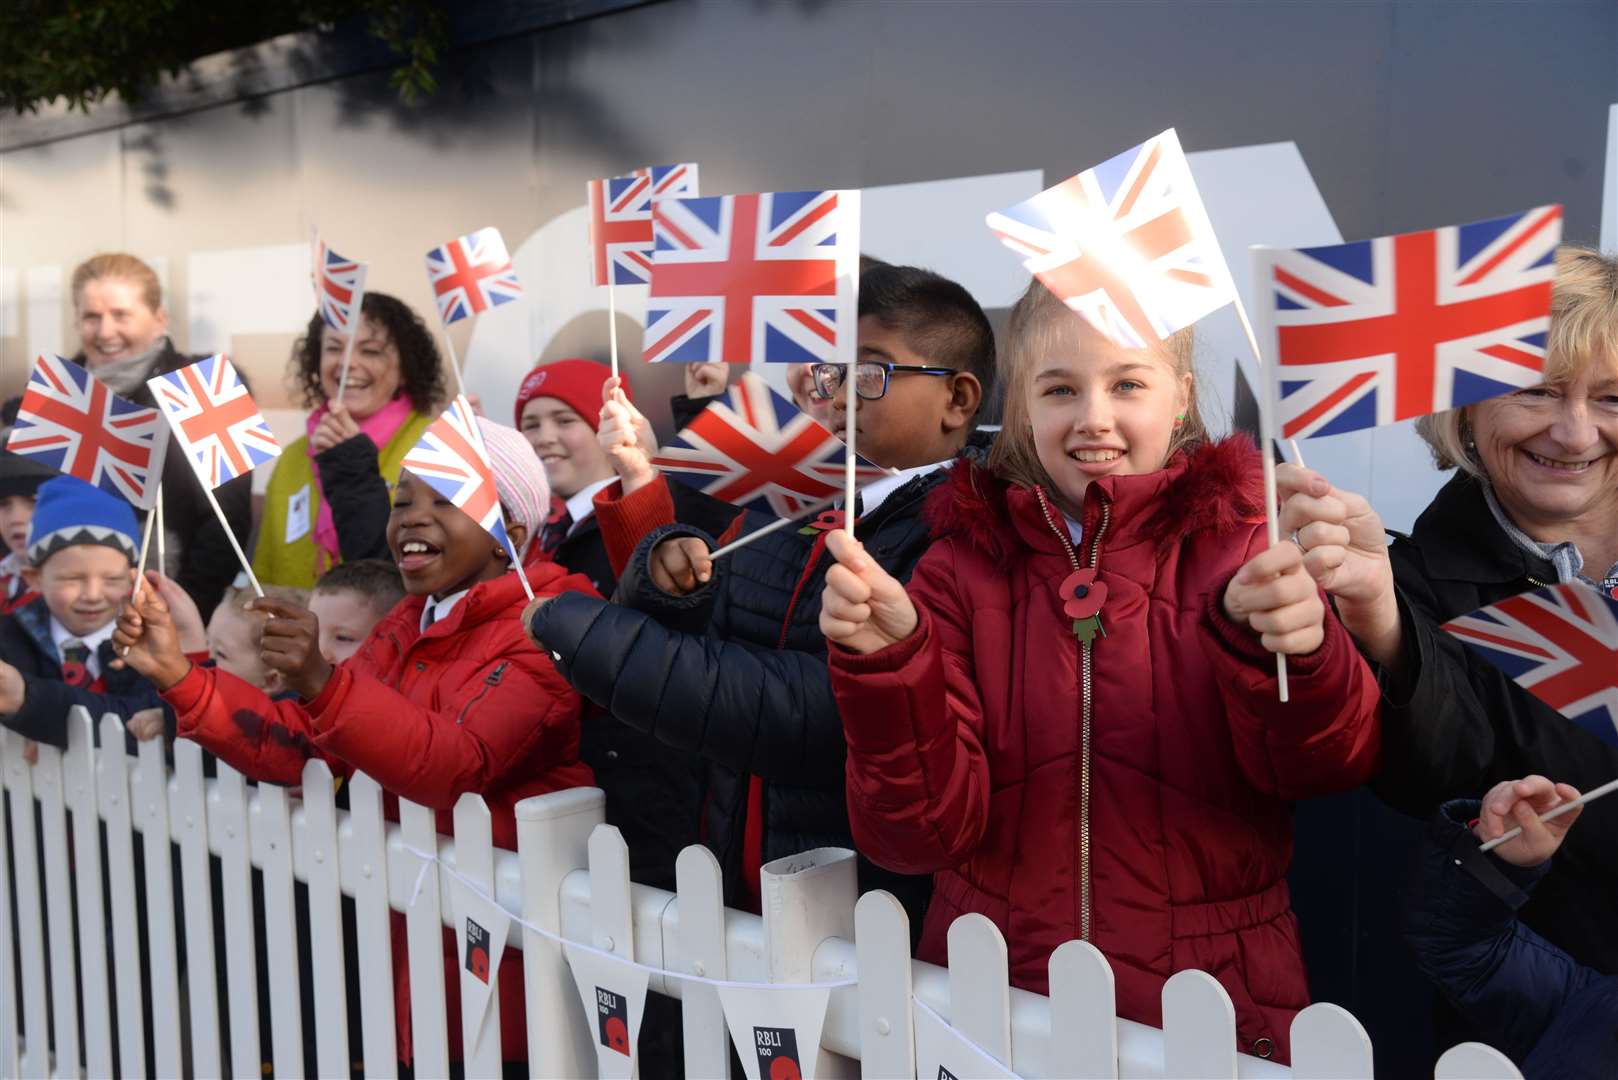 Children from Green Street Green Primary School await the arrival of The Queen at the Royal British Legion Industries, Aylesford on Wednesday. Picture: Chris Davey. (21031414)